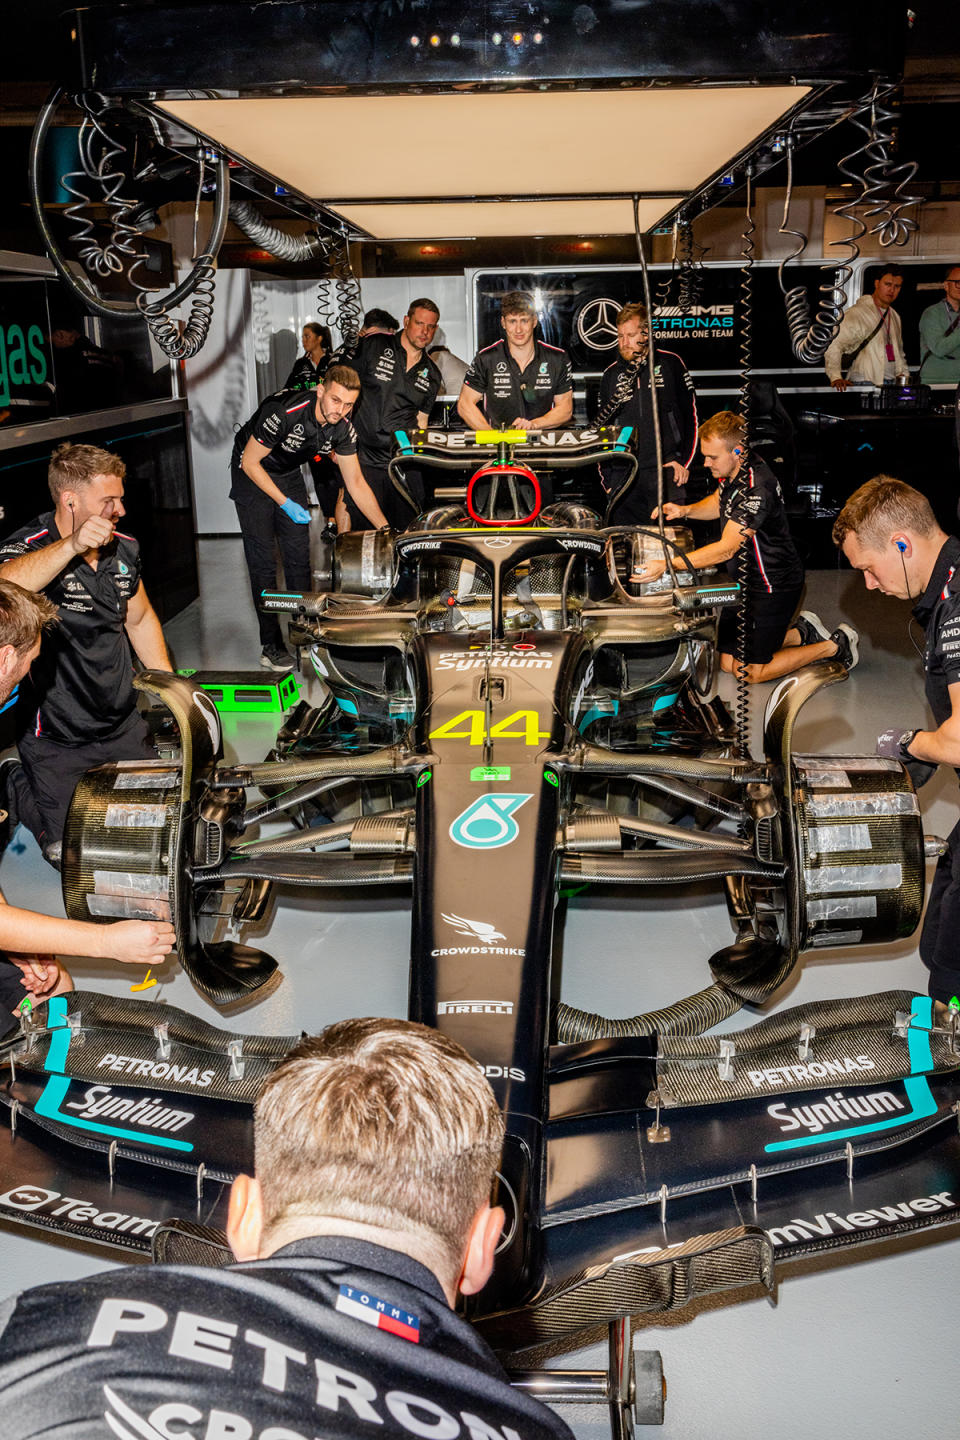 A view of Lewis Hamilton’s race car in the Mercedes pit lane and garage before practice day at the Formula 1 Grand Prix on November 16, 2023 in Las Vegas, Nevada.